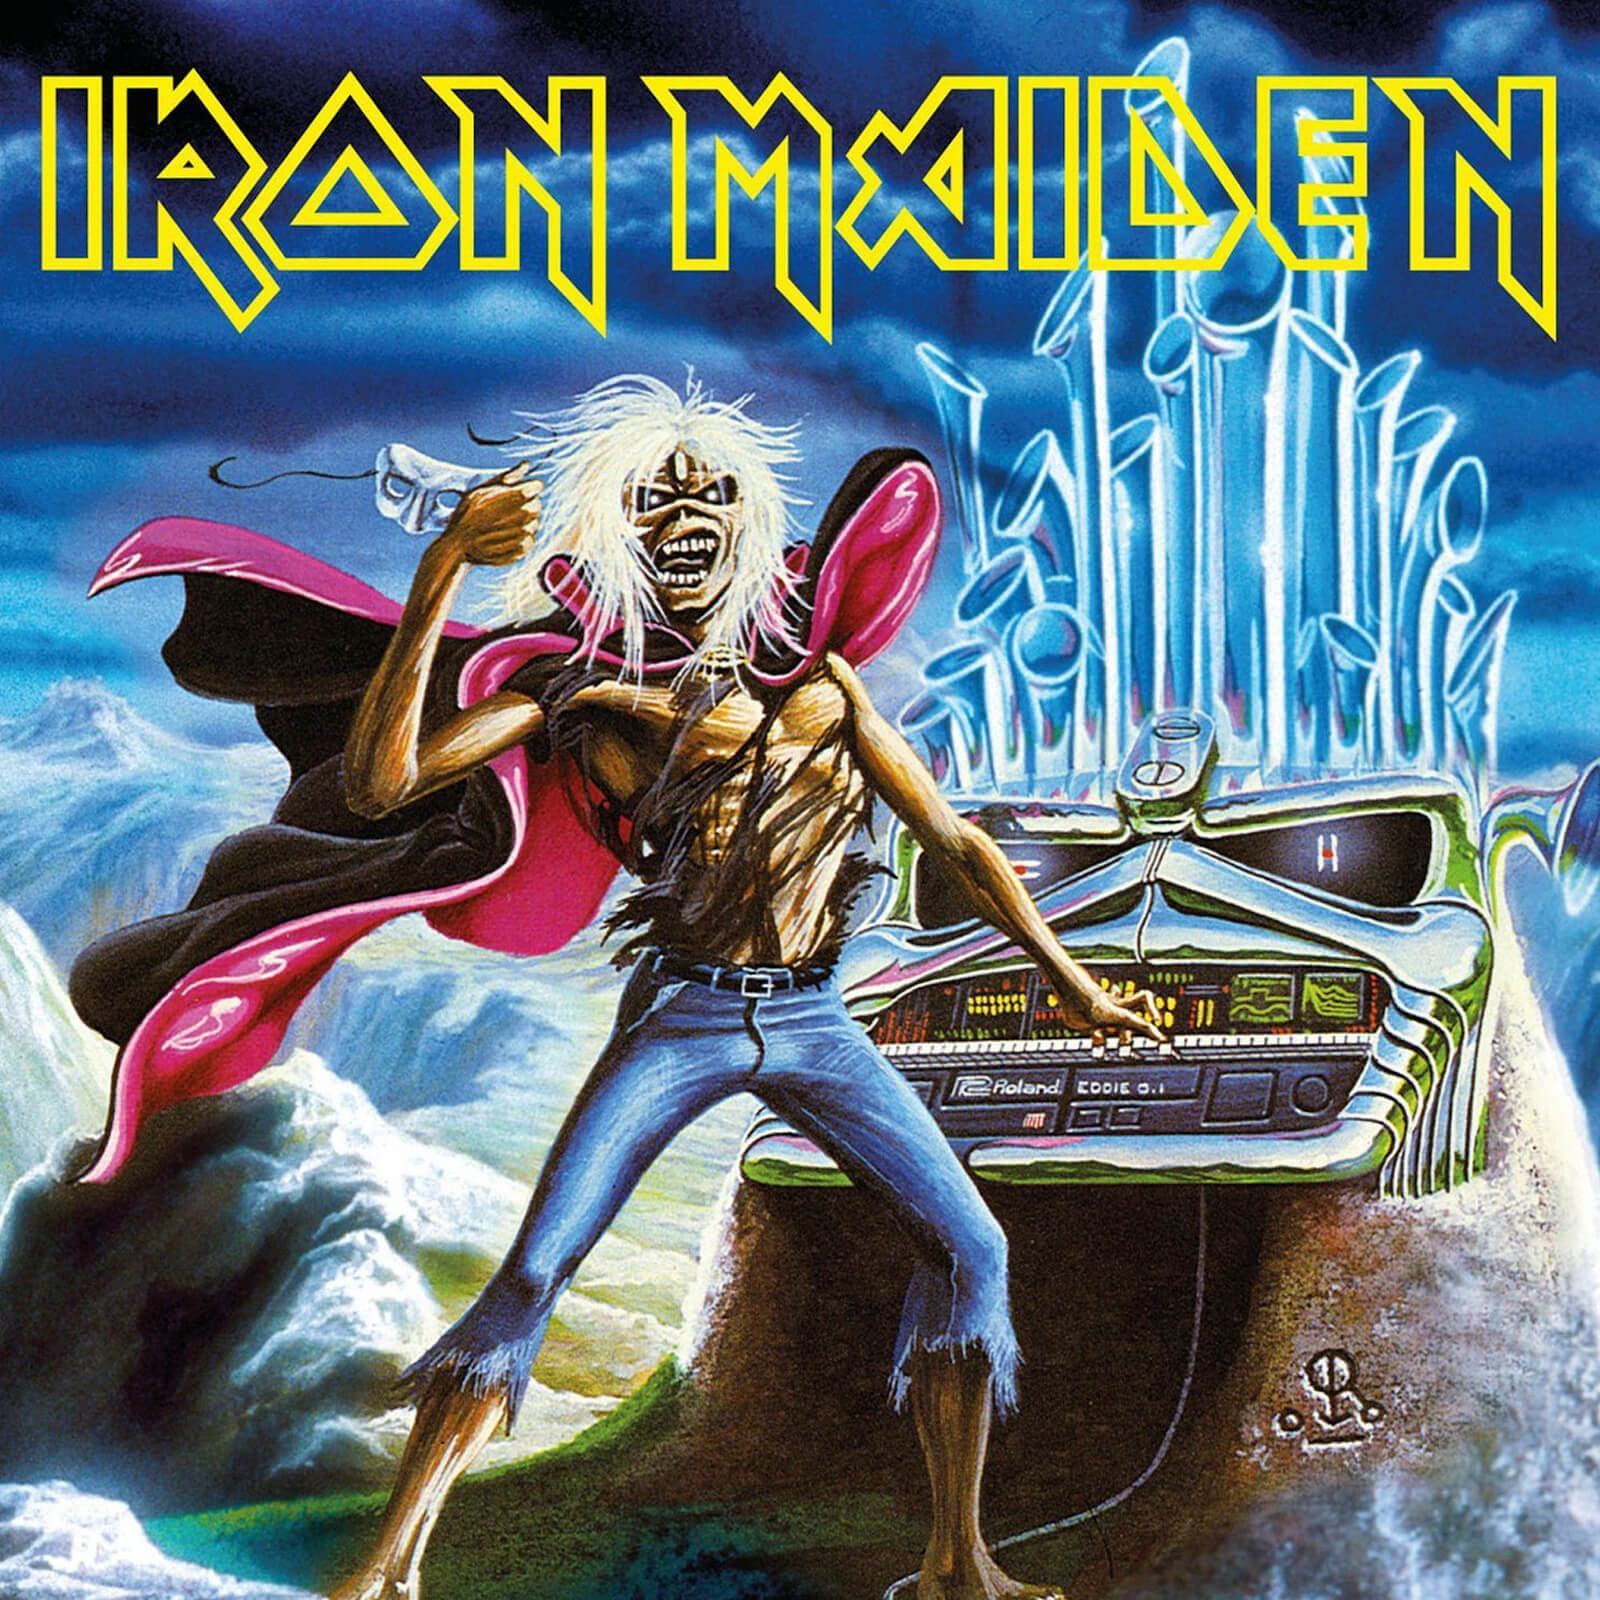 Plg Uk Frontline - Iron maiden - run to the hills (live) 7  single